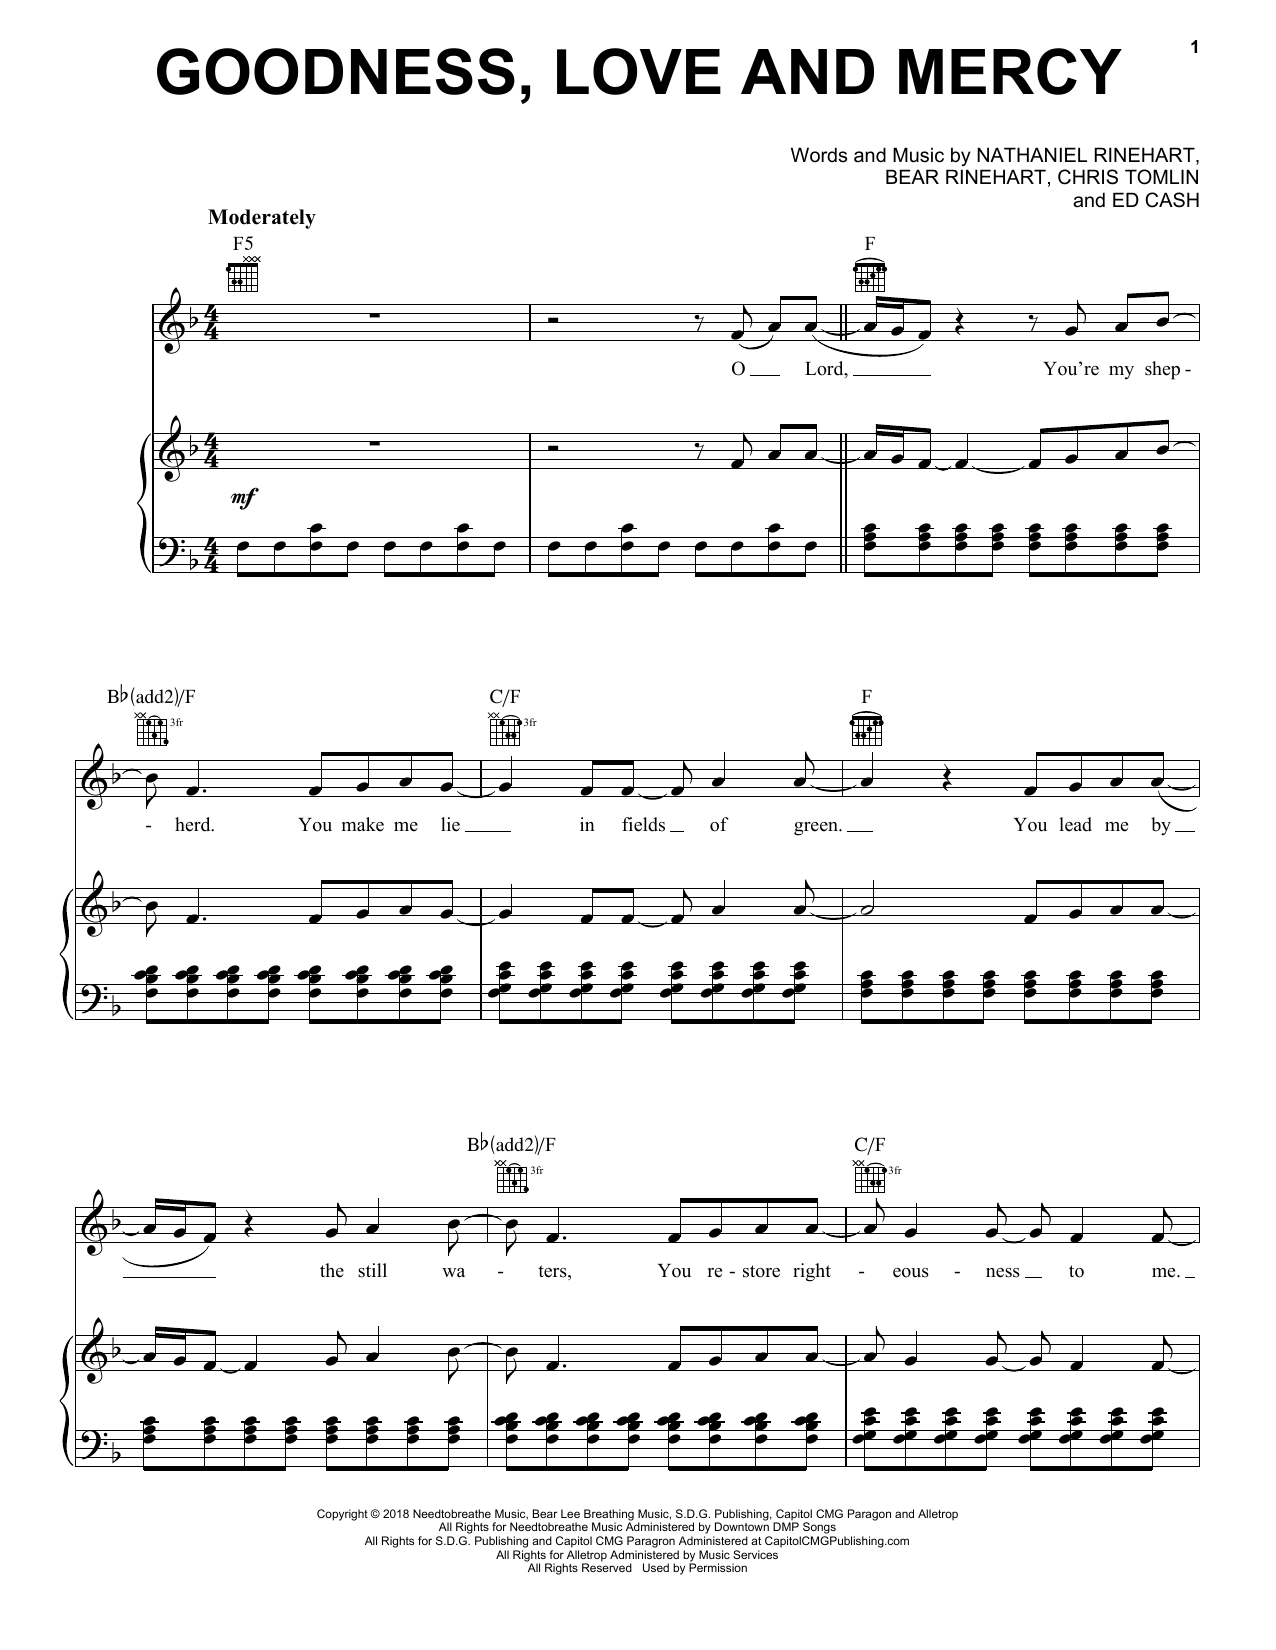 Download Chris Tomlin Goodness, Love And Mercy Sheet Music